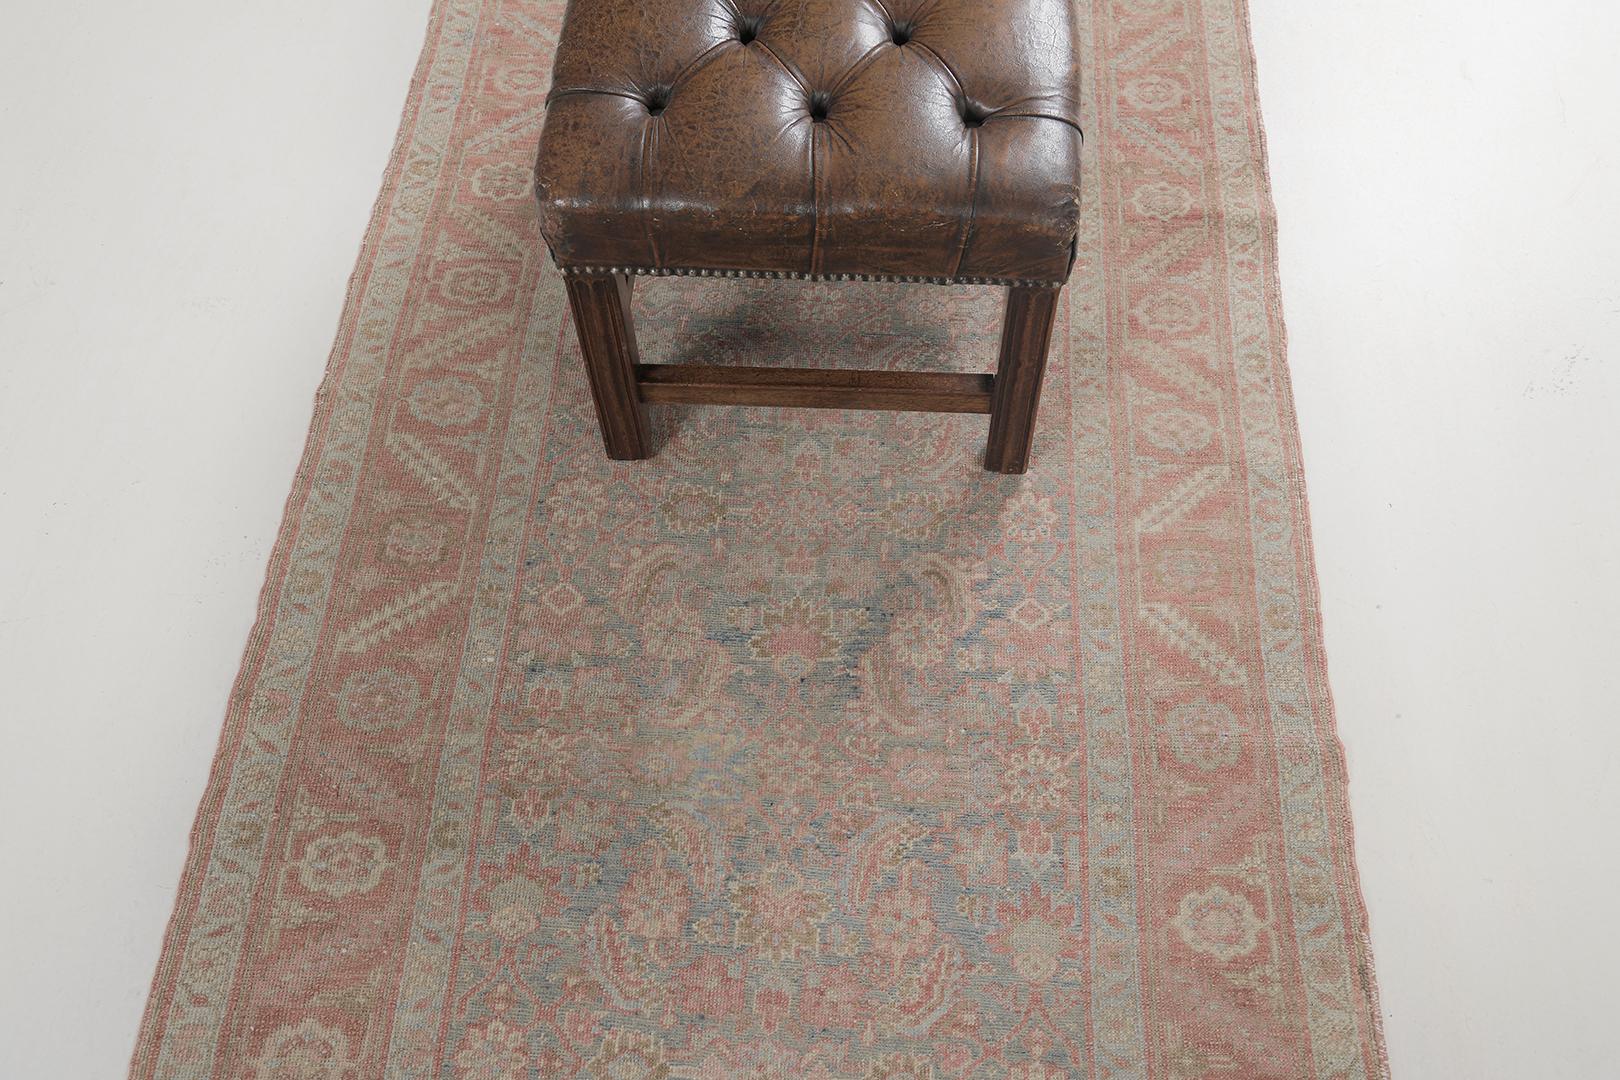 Early 20th Century Antique Persian Bakhsyayesh by Mehraban Rugs For Sale